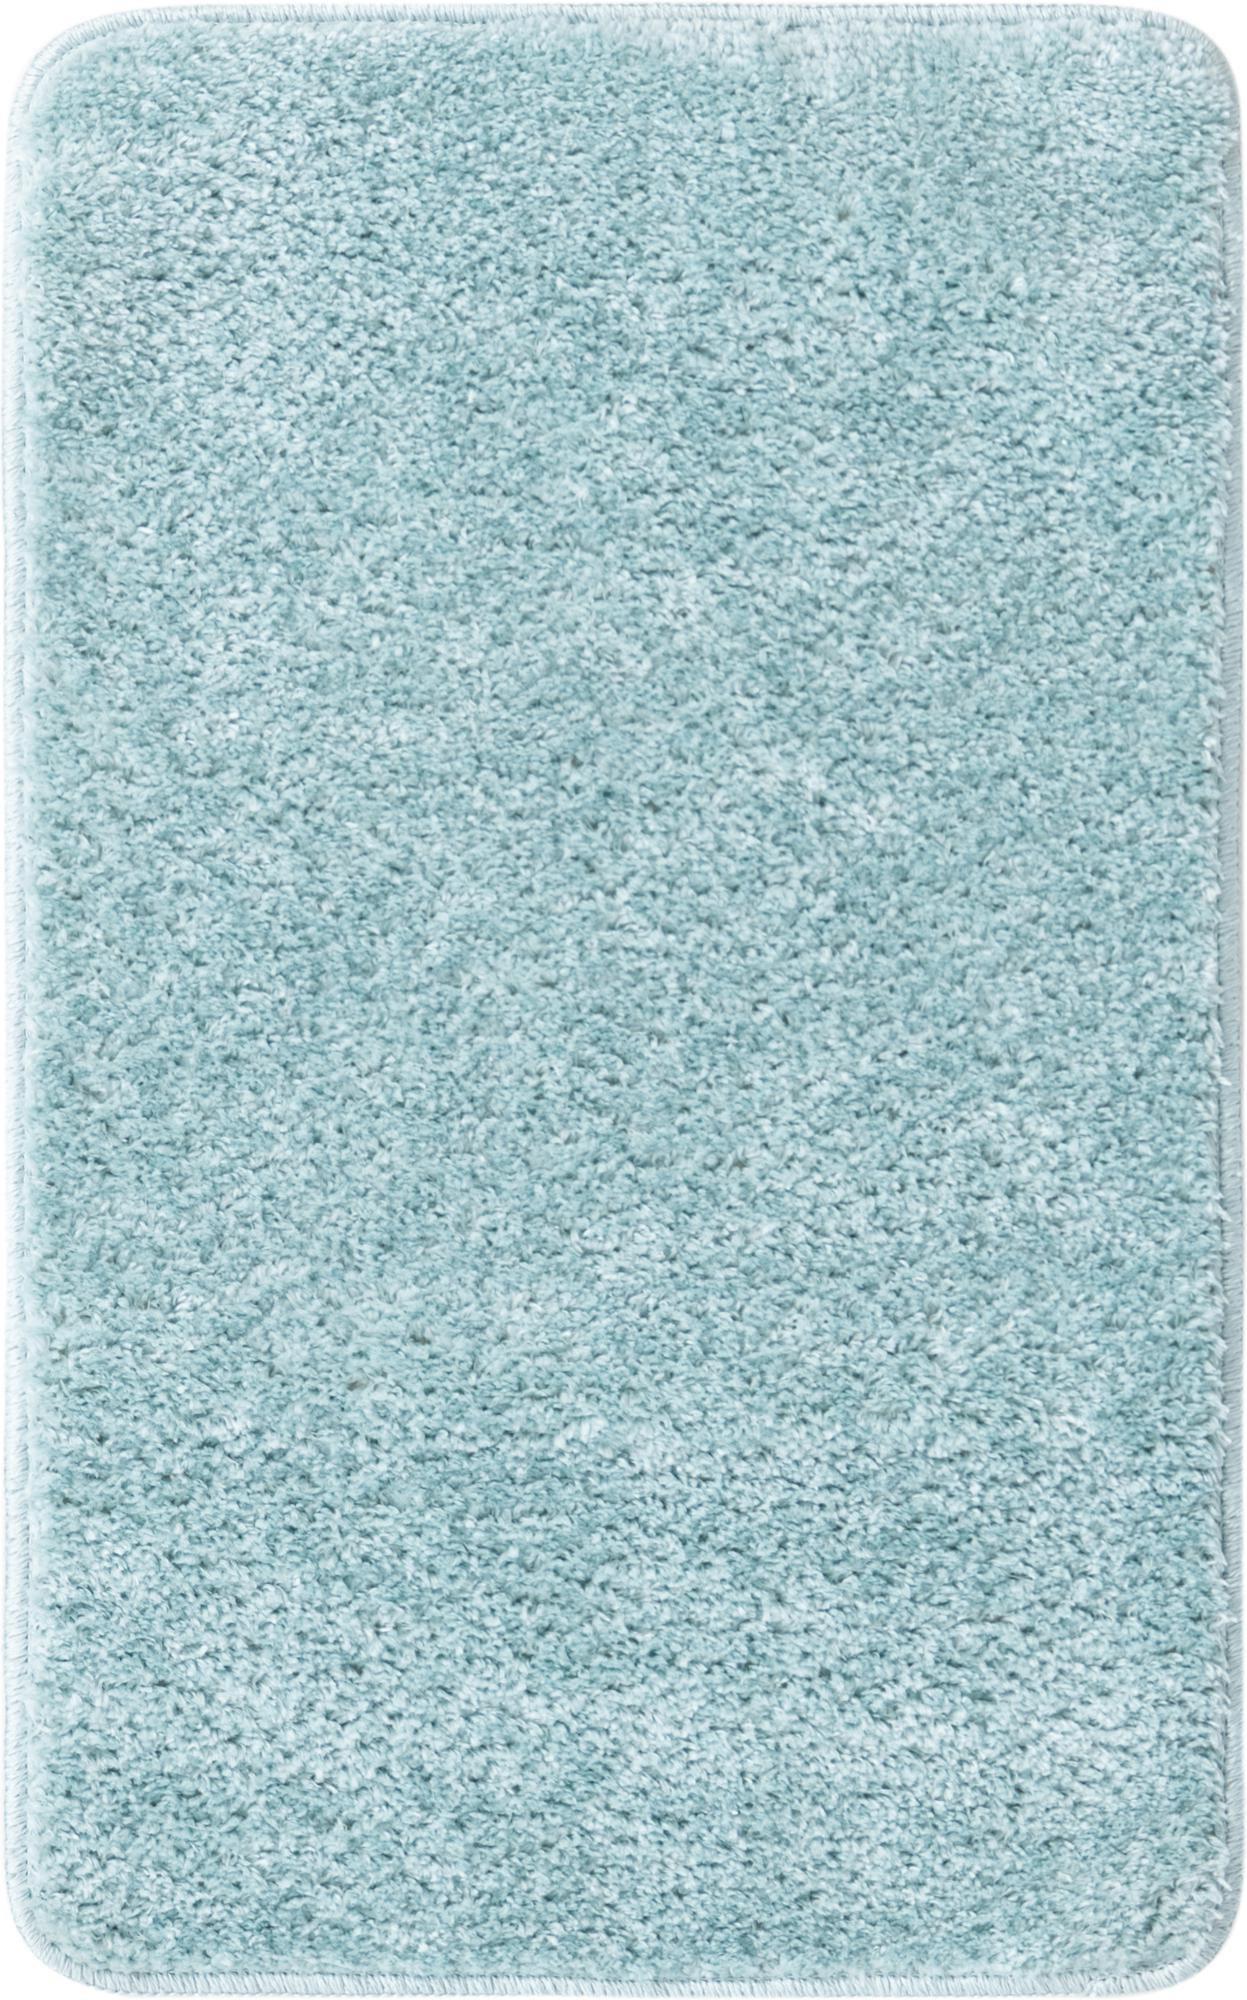 rugpal matabanick solid/striped area rug collection